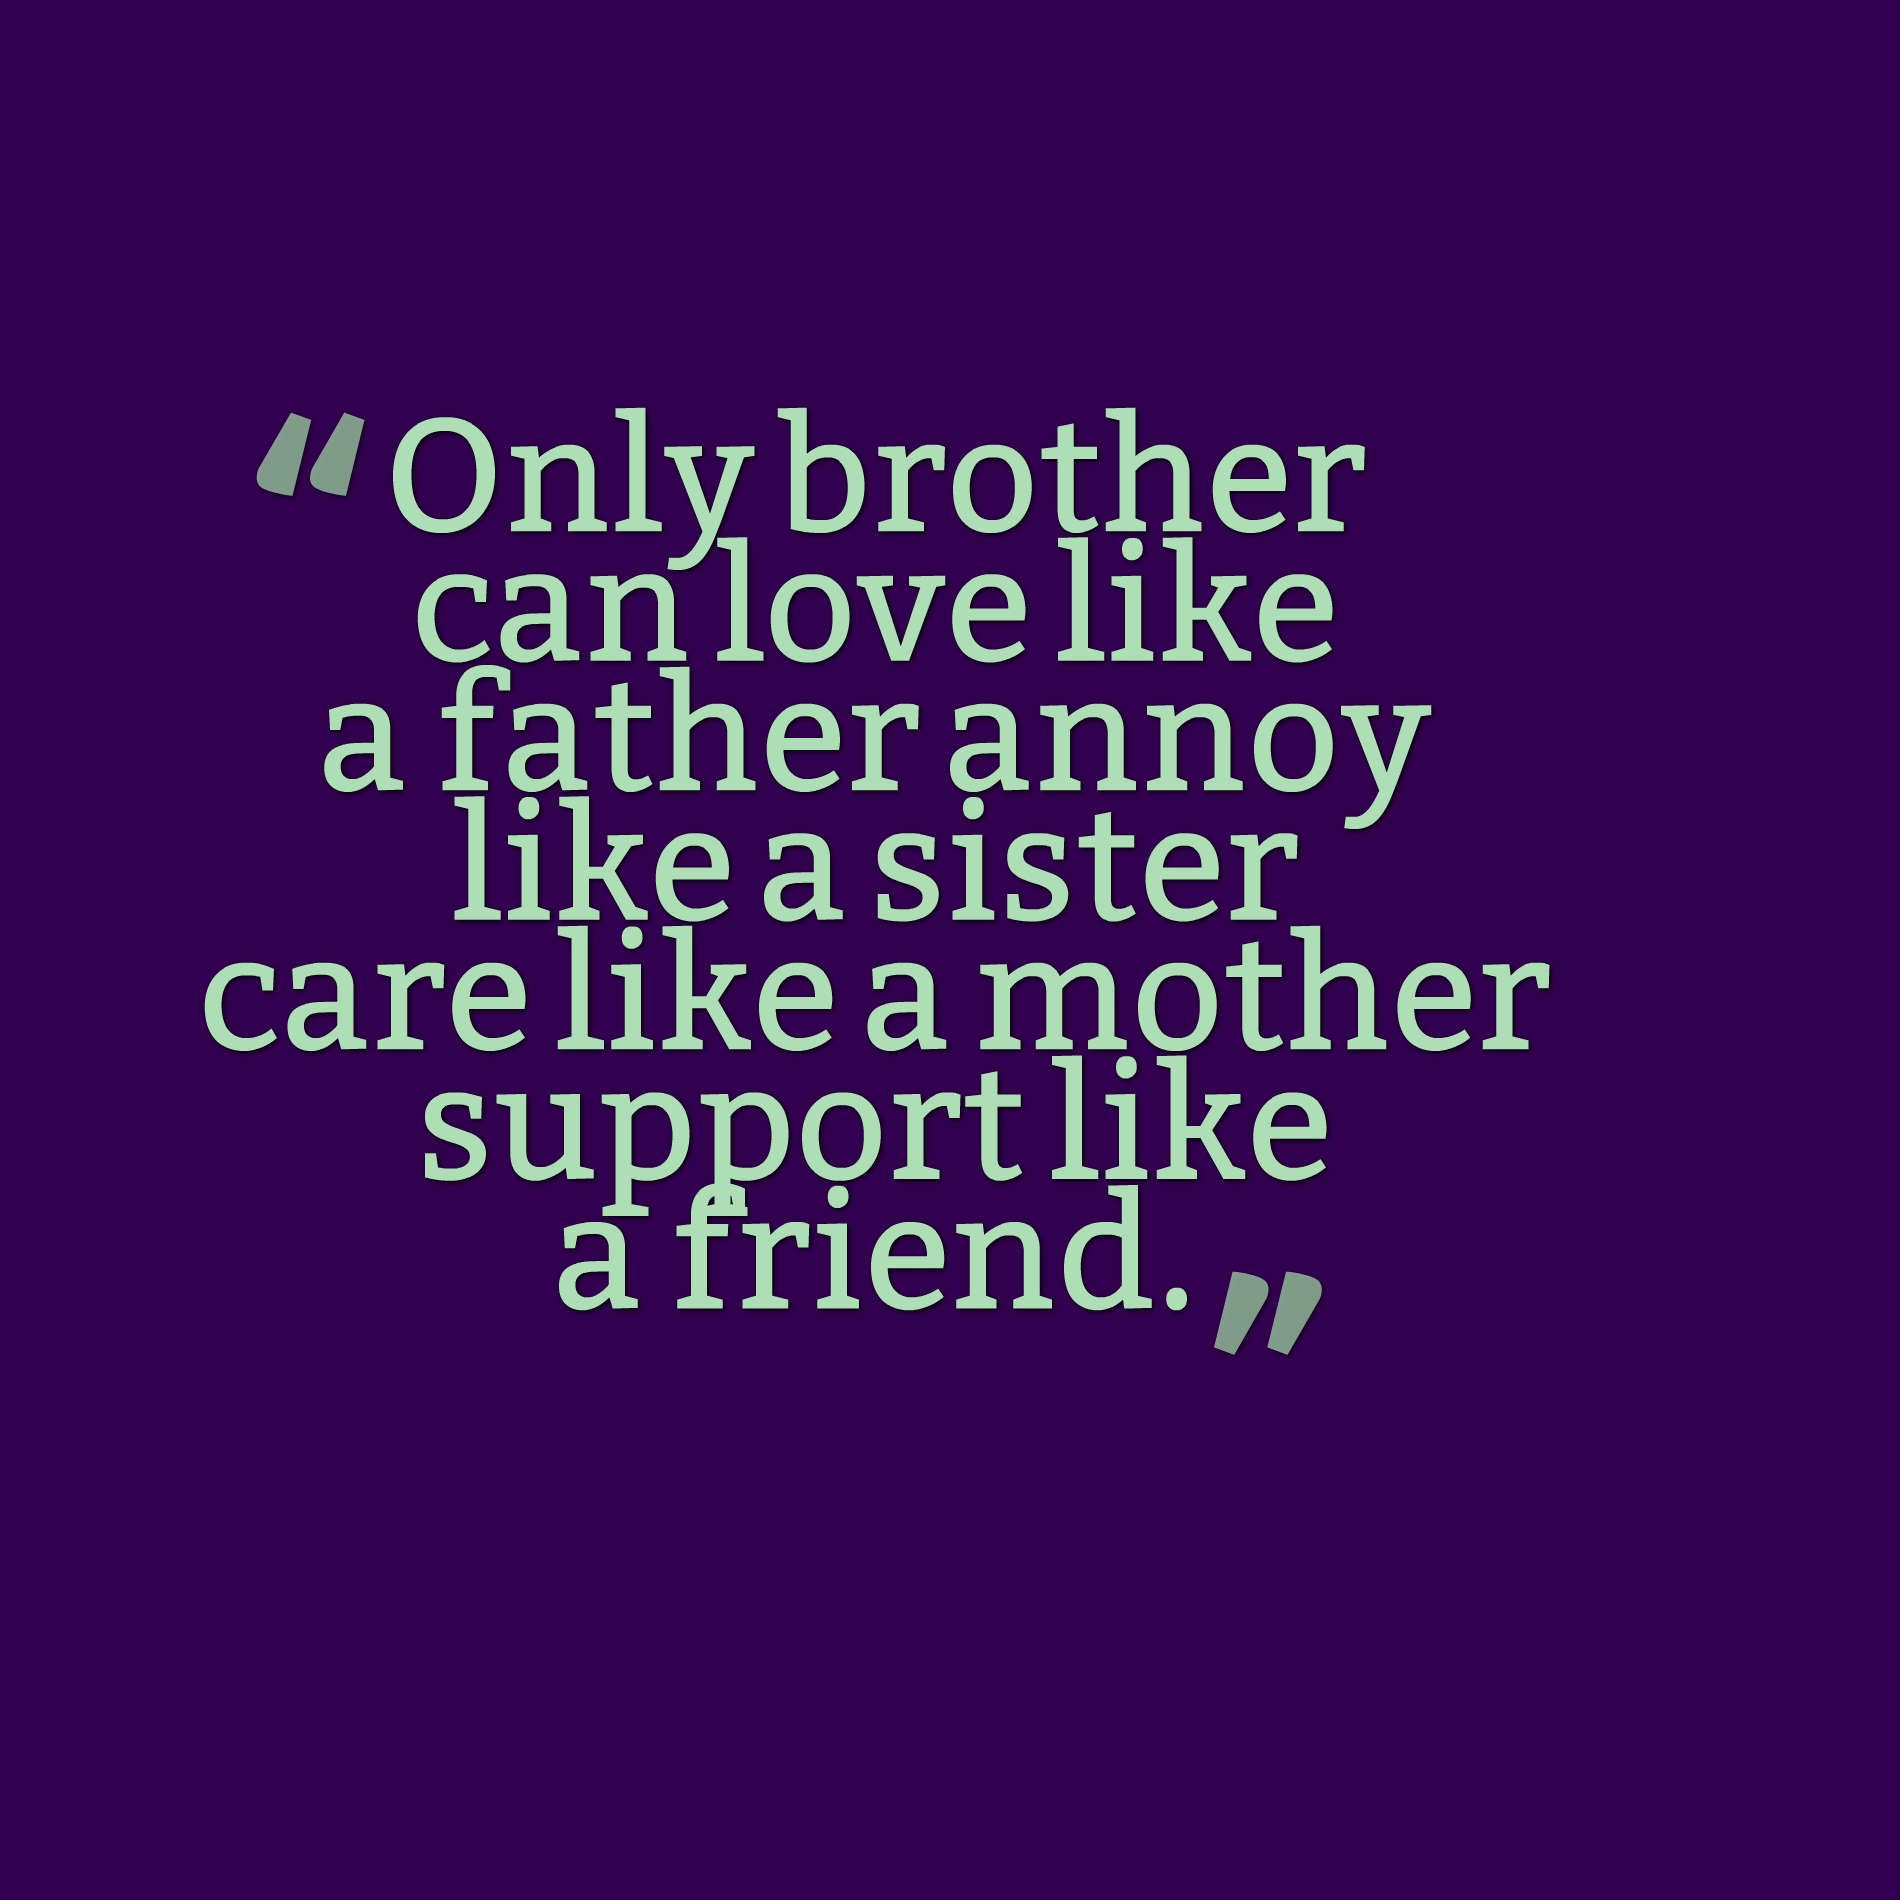 Only brother can love like a father annoy like a sister care like a mother support like a friend.